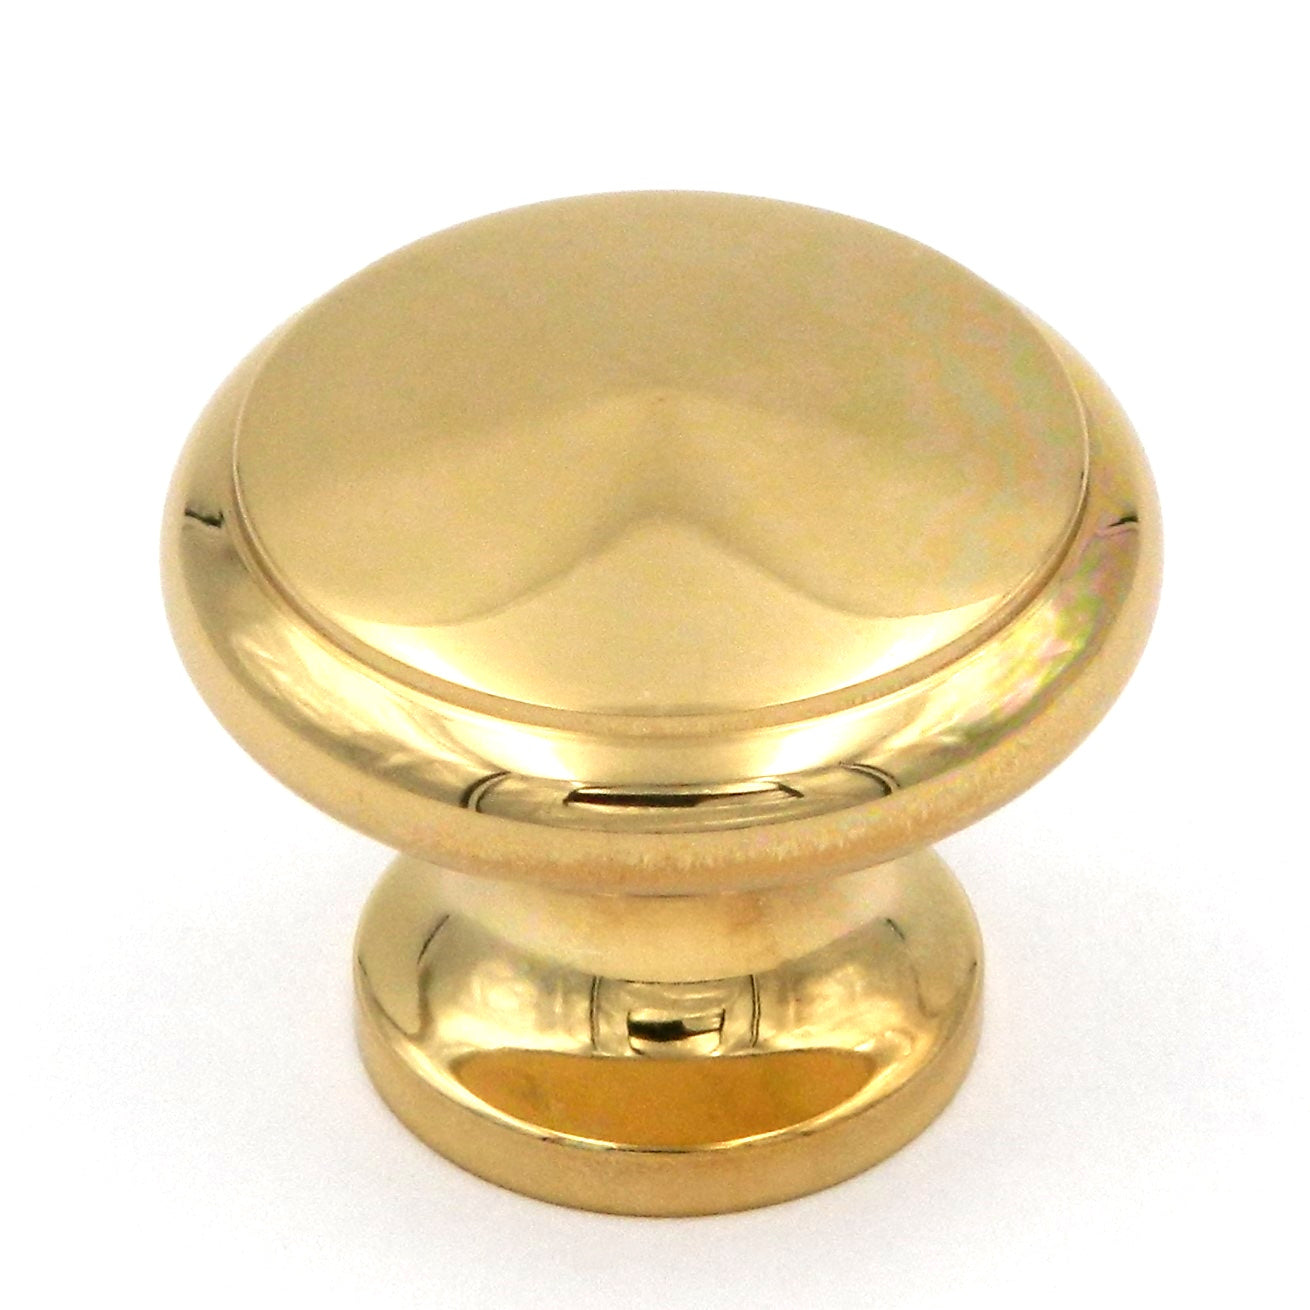 Hickory Hardware Manor House Polished Brass Round Flat Top 1 1/4" Solid Brass Cabinet Knob P9119